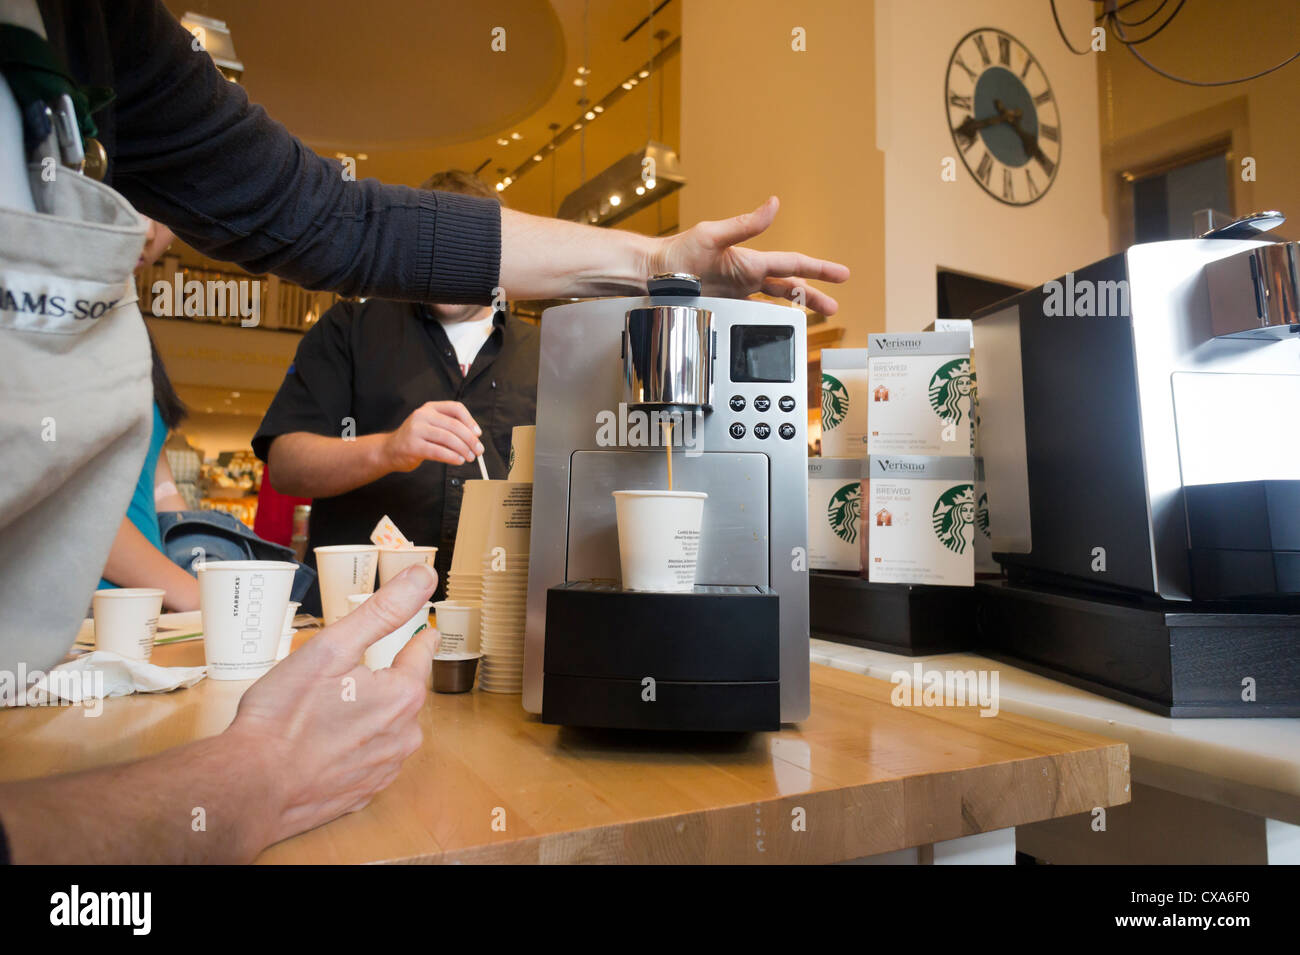 A single up serving of espresso from a newly introduced Starbucks brand single-shot espresso coffee brewer Stock Photo